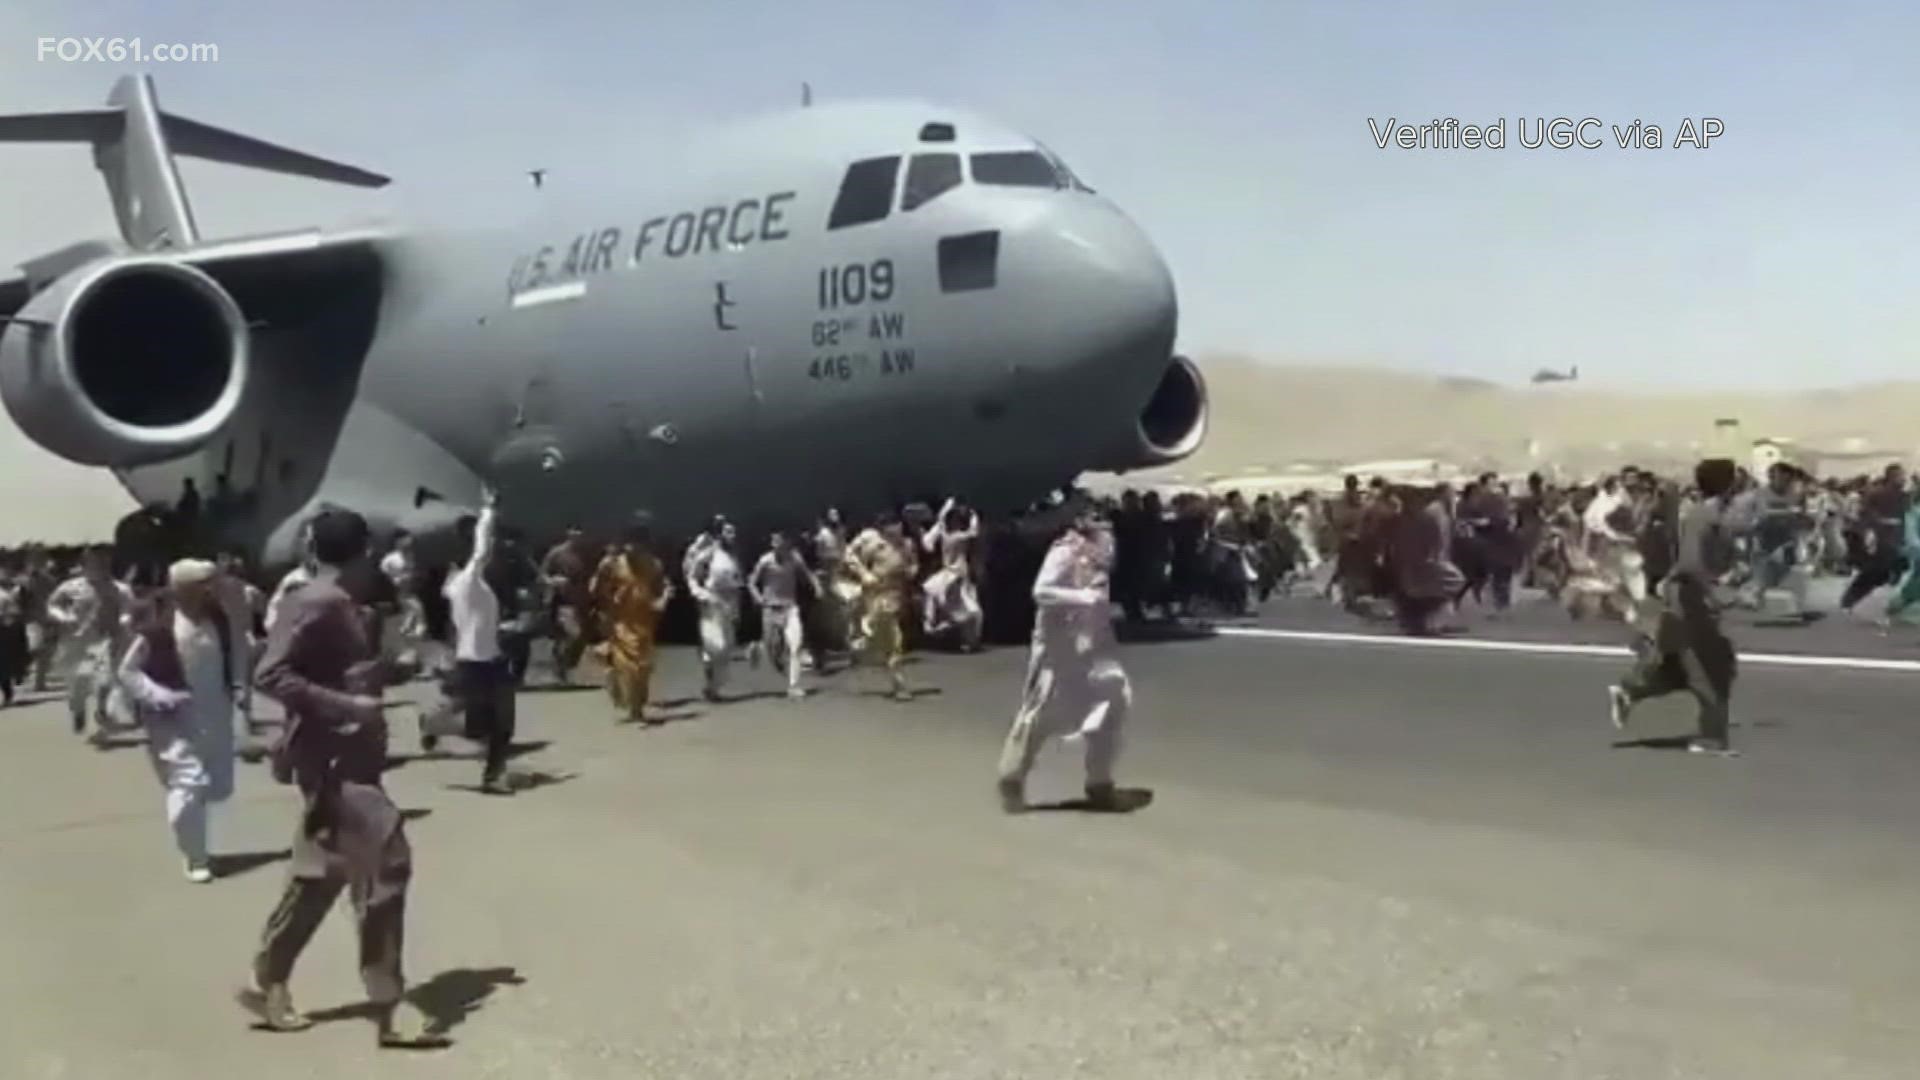 Biden spoke after the planned withdrawal of American forces turned deadly at Kabul's airport as thousands tried to flee the Taliban's takeover of the government.